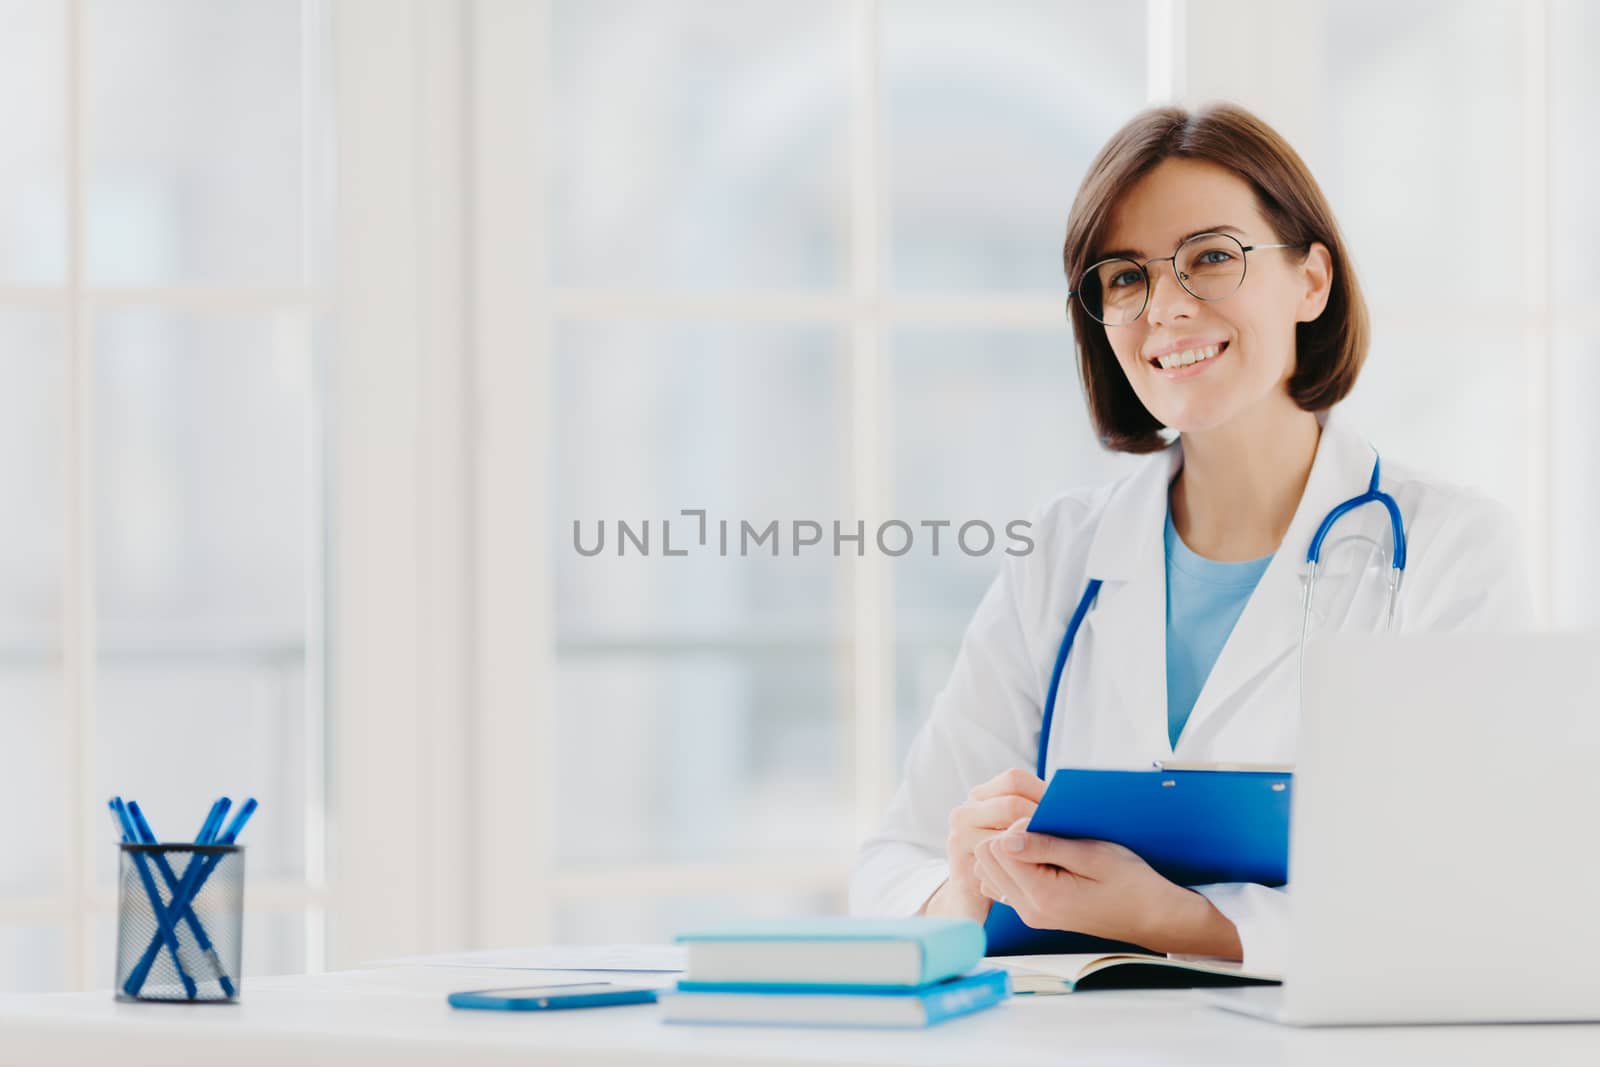 Female doctor writes prescription on special form, works in private clinic, wears white medical gown, ready for seeing patients, poses at workplace. Smiling physician or medical worker holds clipboard